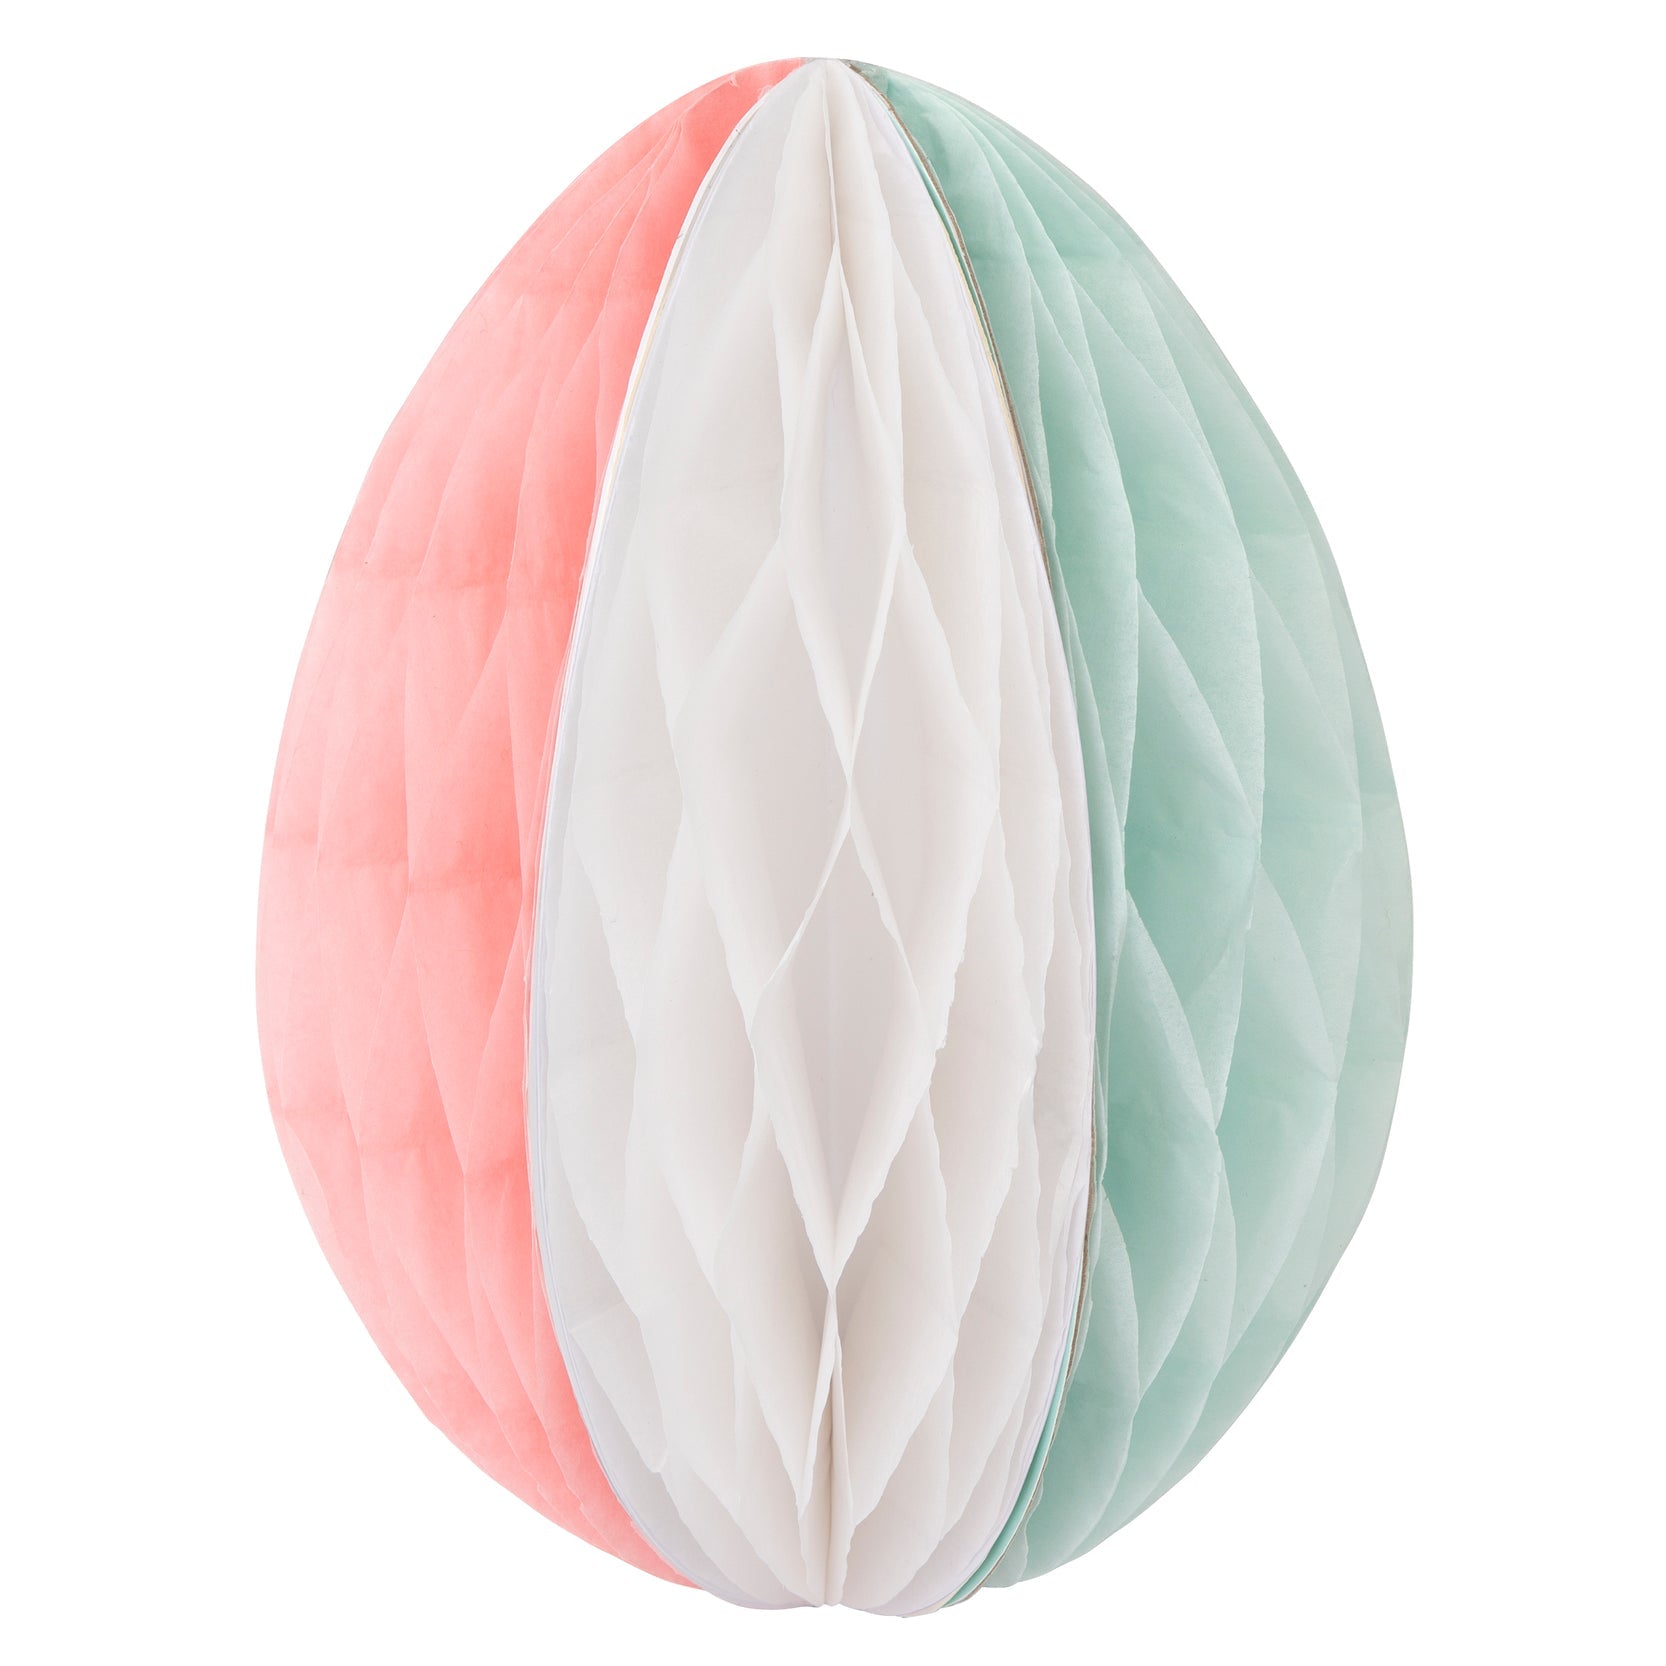 A Meri Meri Easter Honeycomb Decorations egg with a pink, green and white pattern.